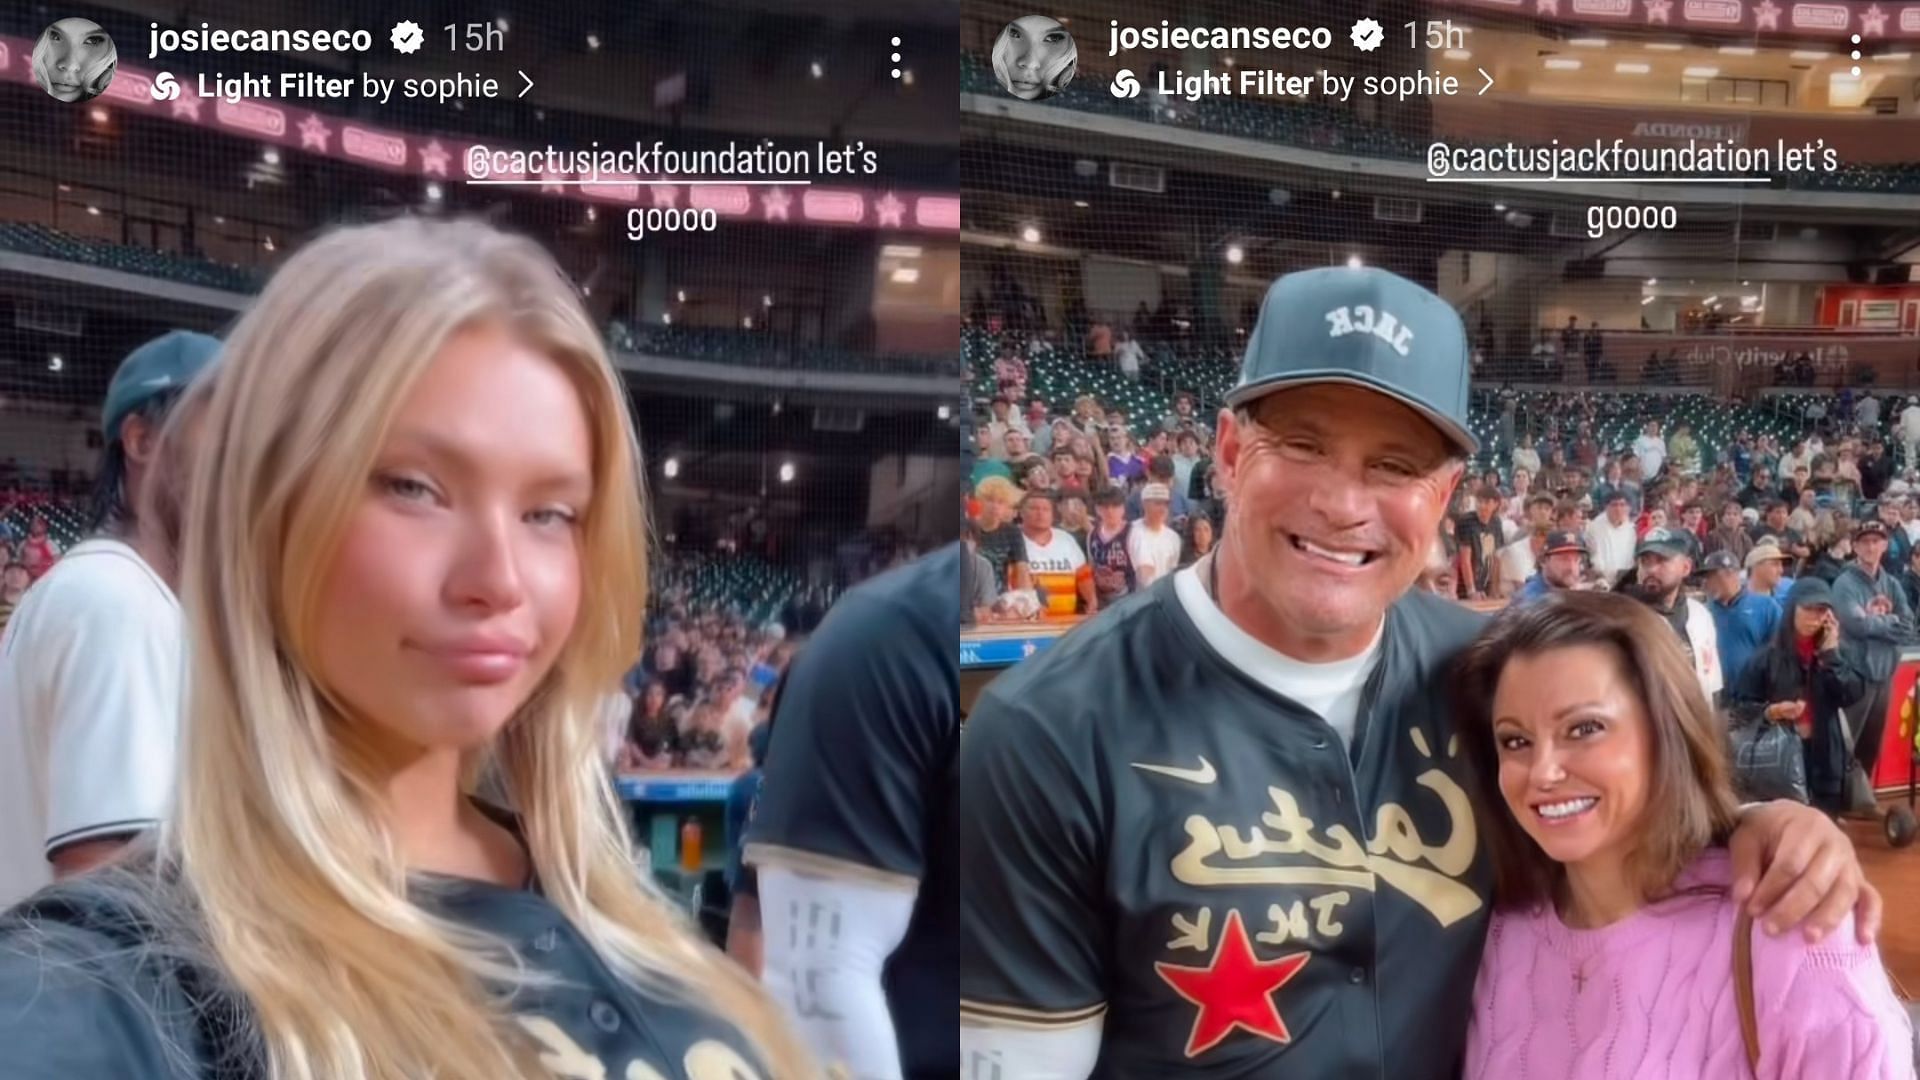 Josie Canseco shared some images from Travis Scott&#039;s celebrity softball game on her Instagram account